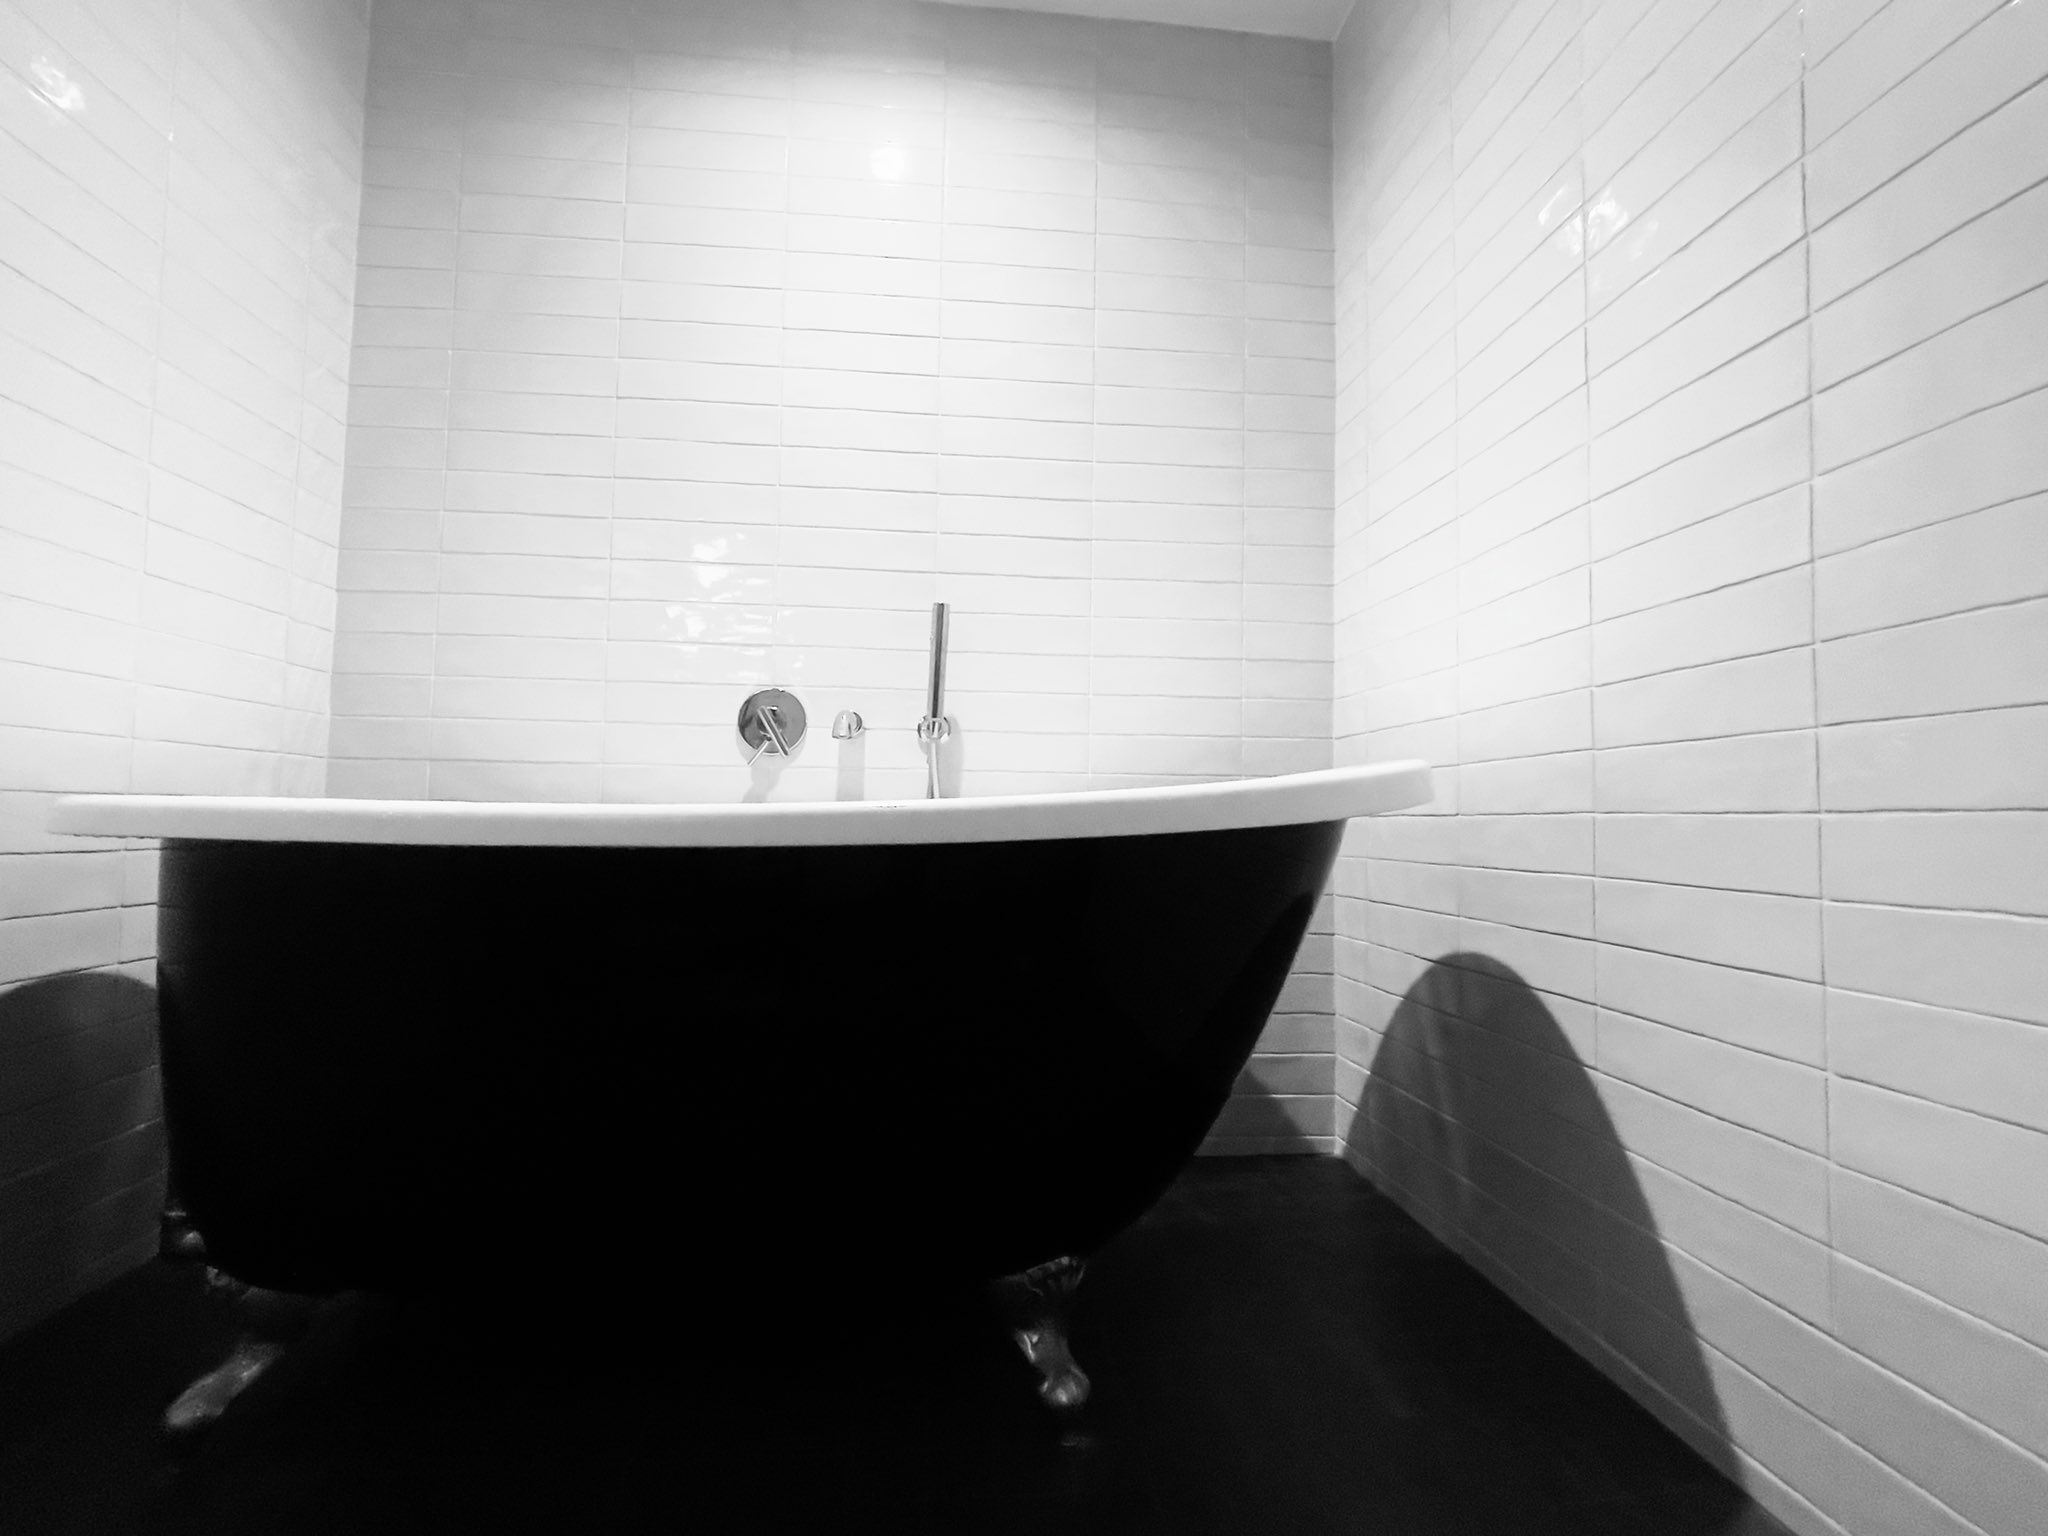 3 pic. I love a stand-alone tub 🖤🤍🖤
@JAYxALEXANDER https://t.co/S07JFysq0M